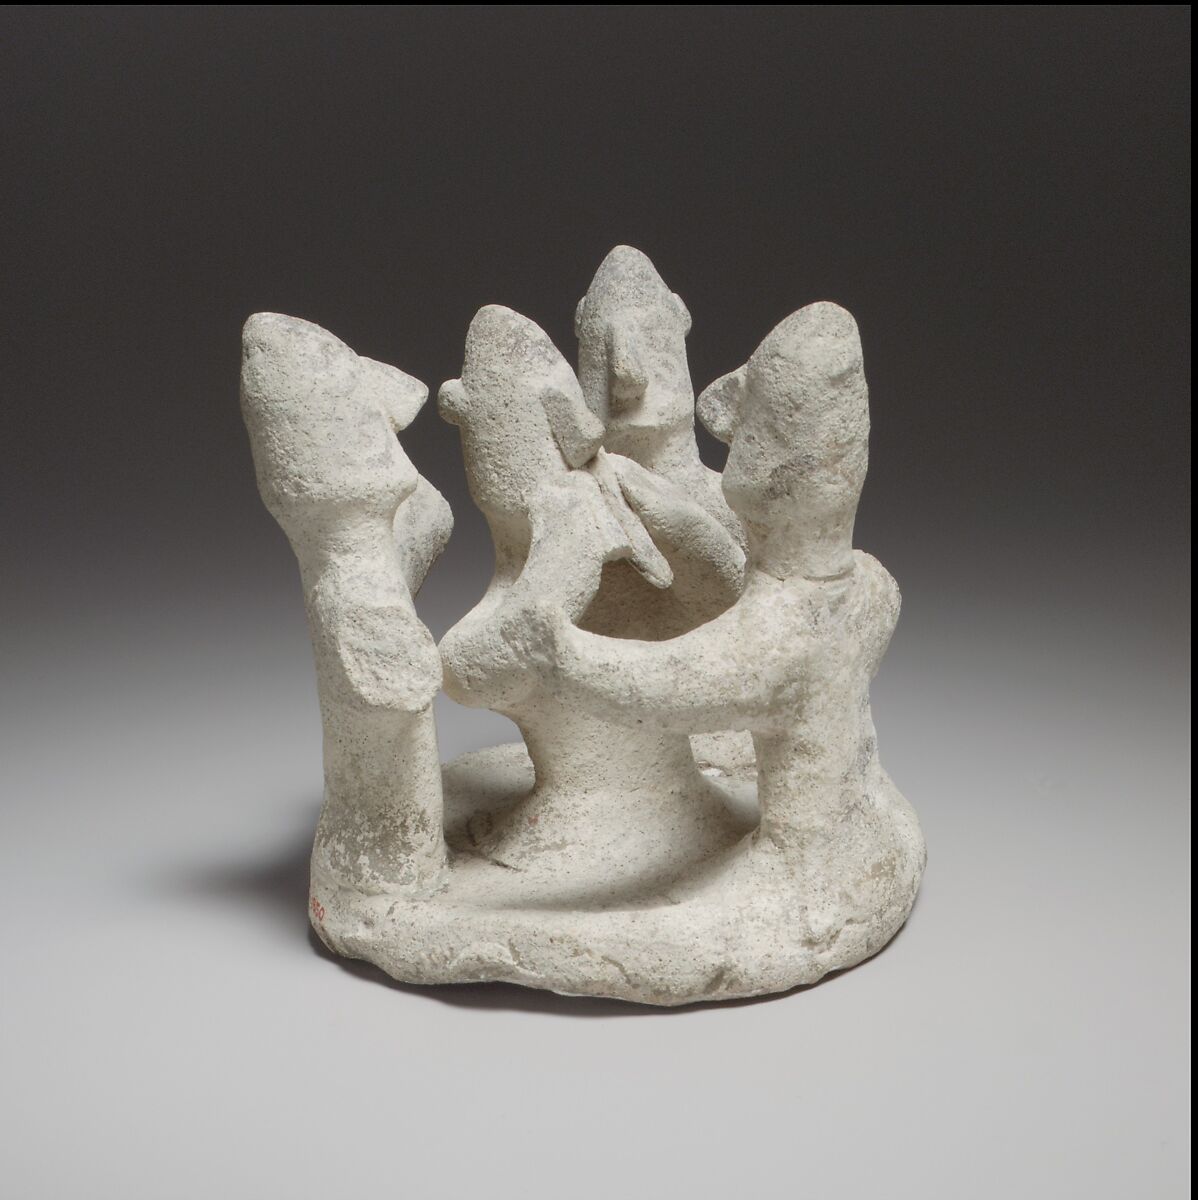 Terracotta statuette of a ring dance, Terracotta, Cypriot 